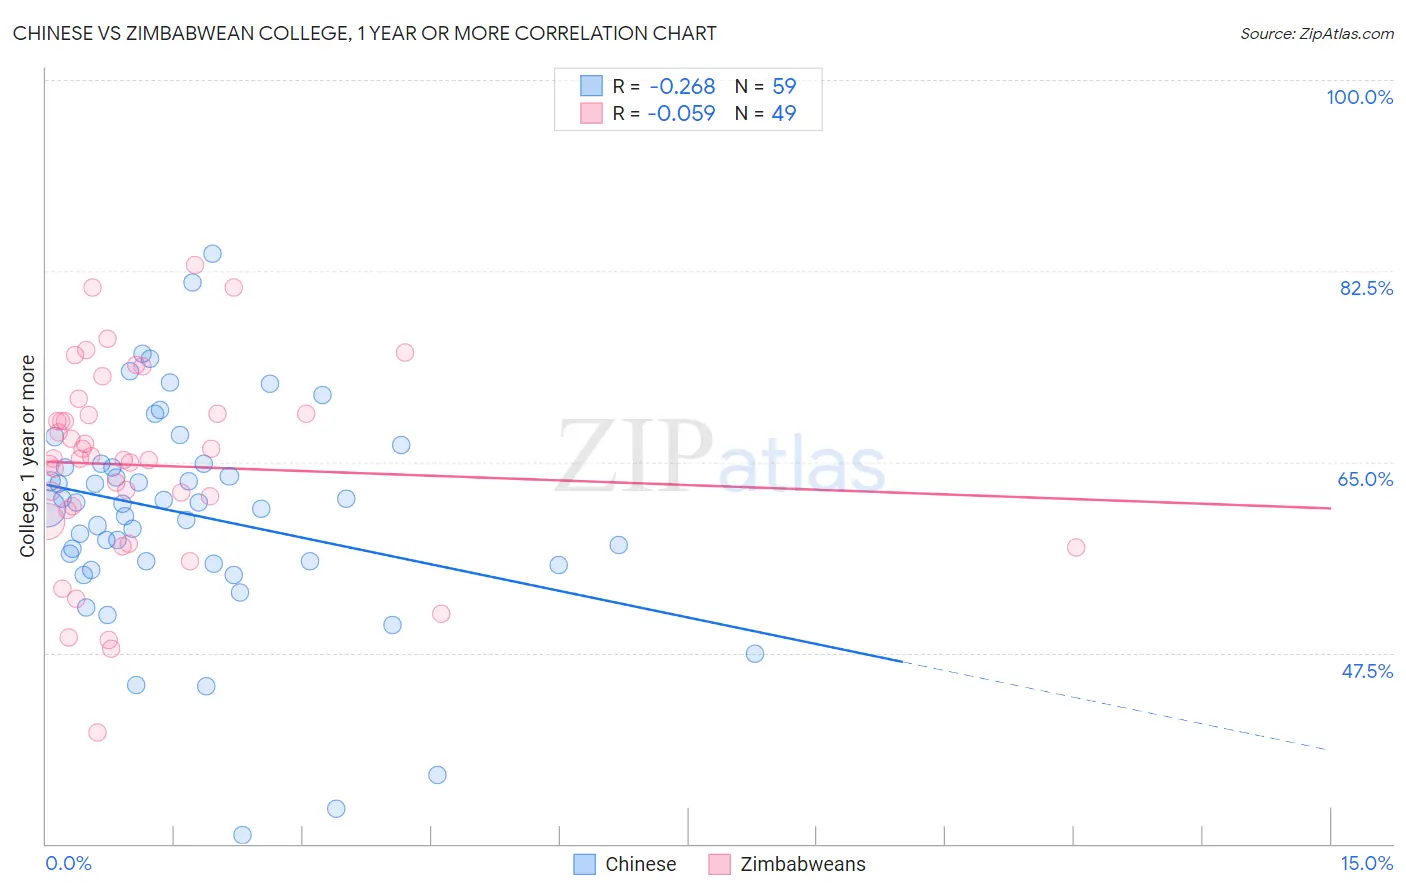 Chinese vs Zimbabwean College, 1 year or more